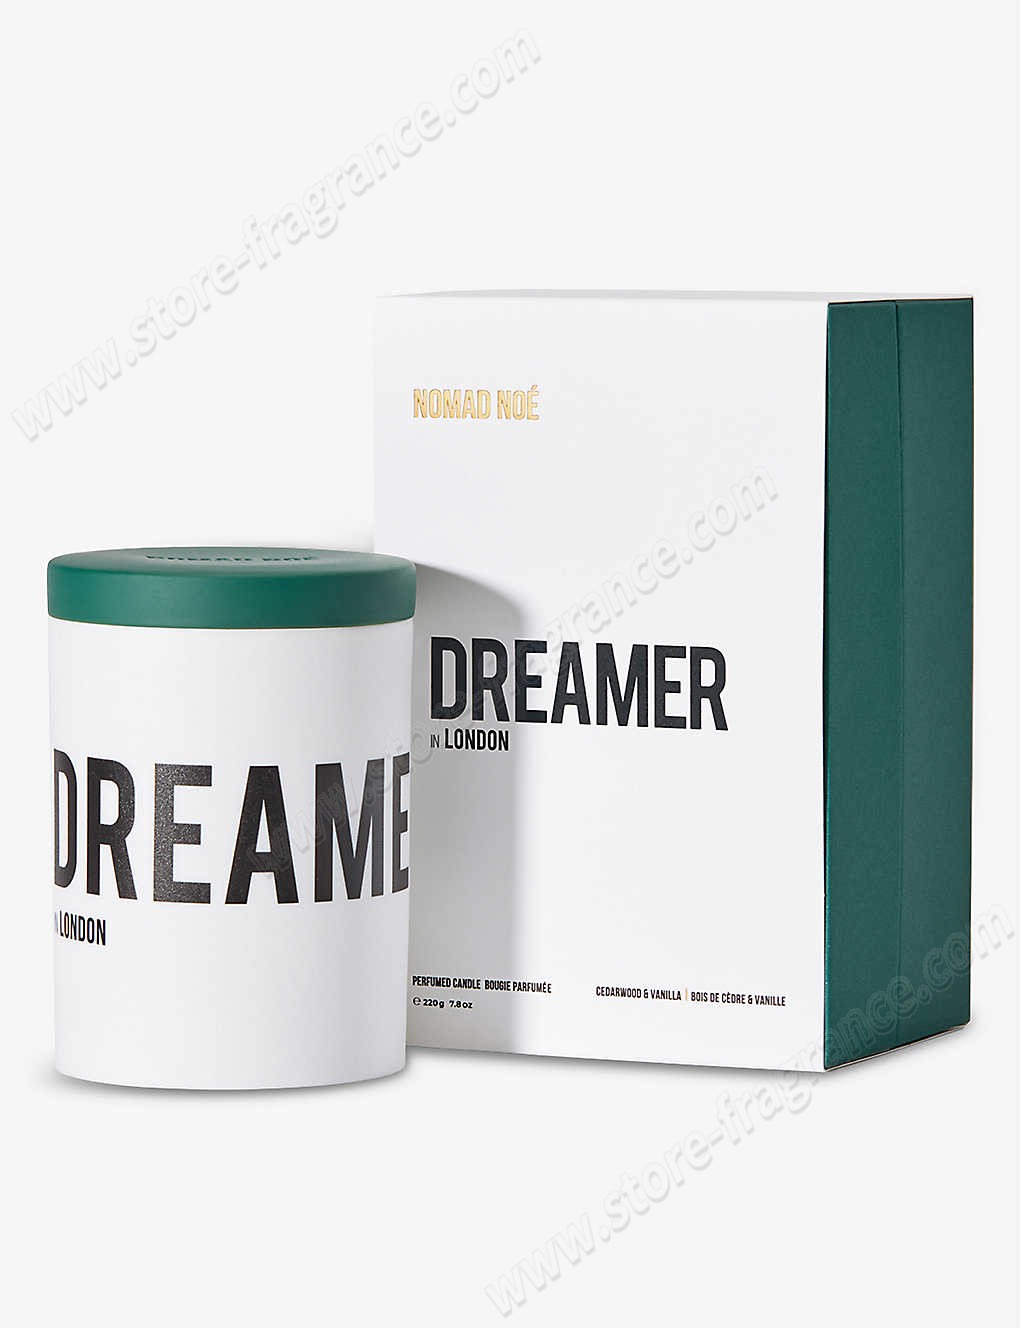 NOMAD NOE/Dreamer in London scented candle 220g ✿ Discount Store - NOMAD NOE/Dreamer in London scented candle 220g ✿ Discount Store